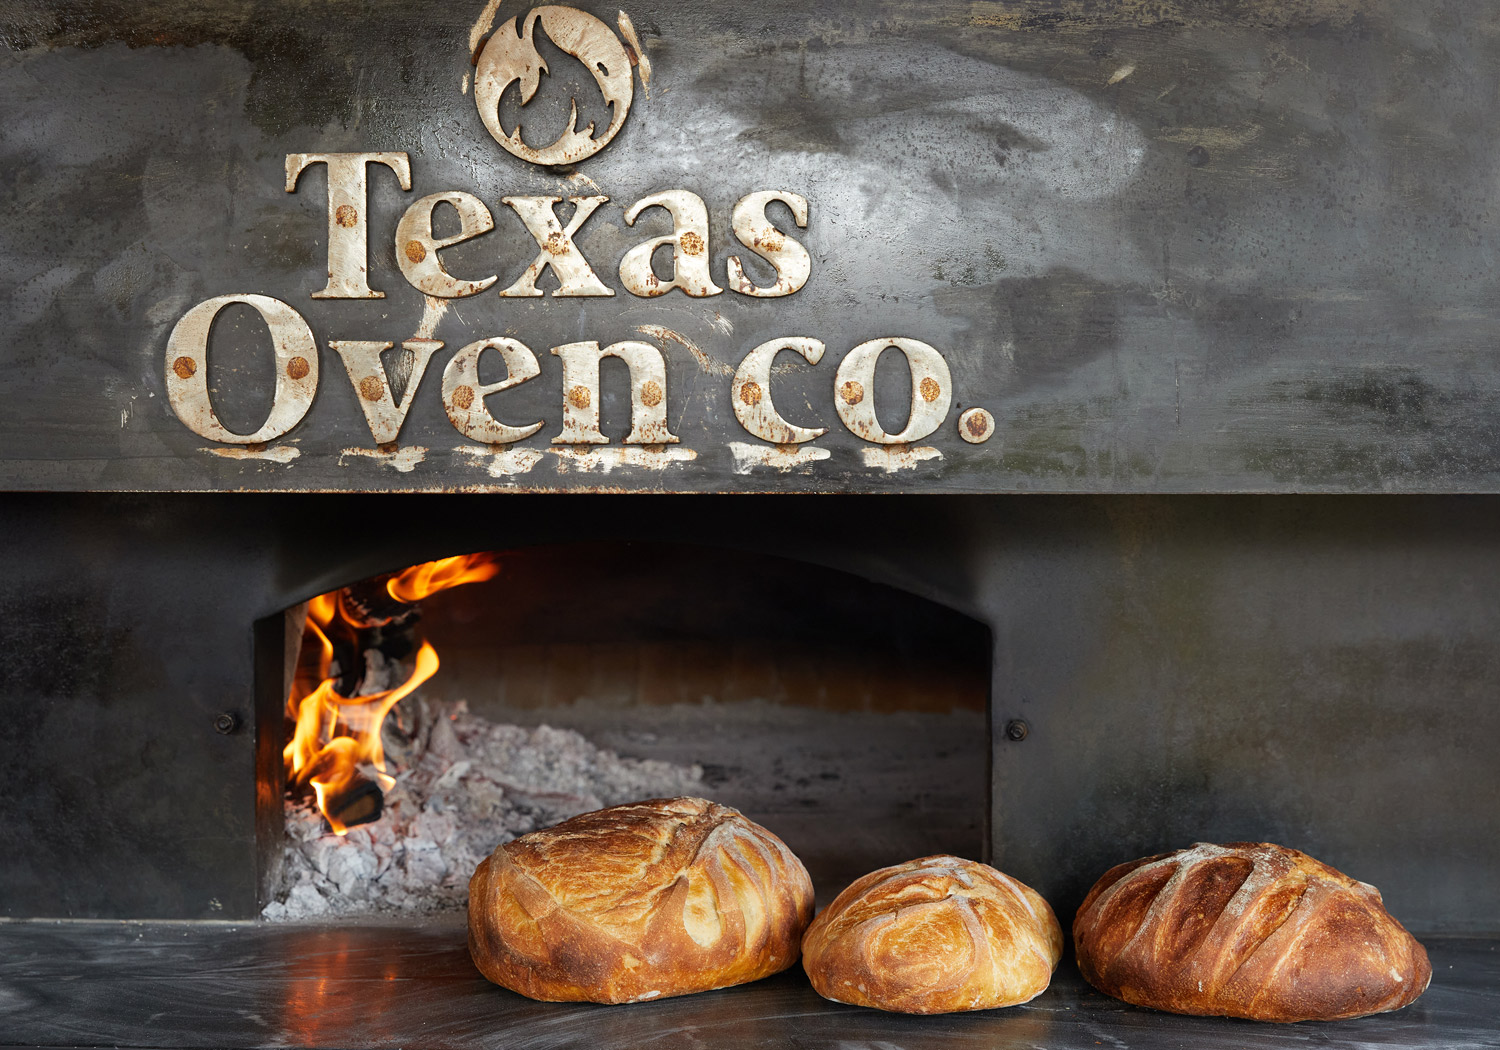 oven baked bread Texas Oven Co. by lifestyle photographer Buff Strickland